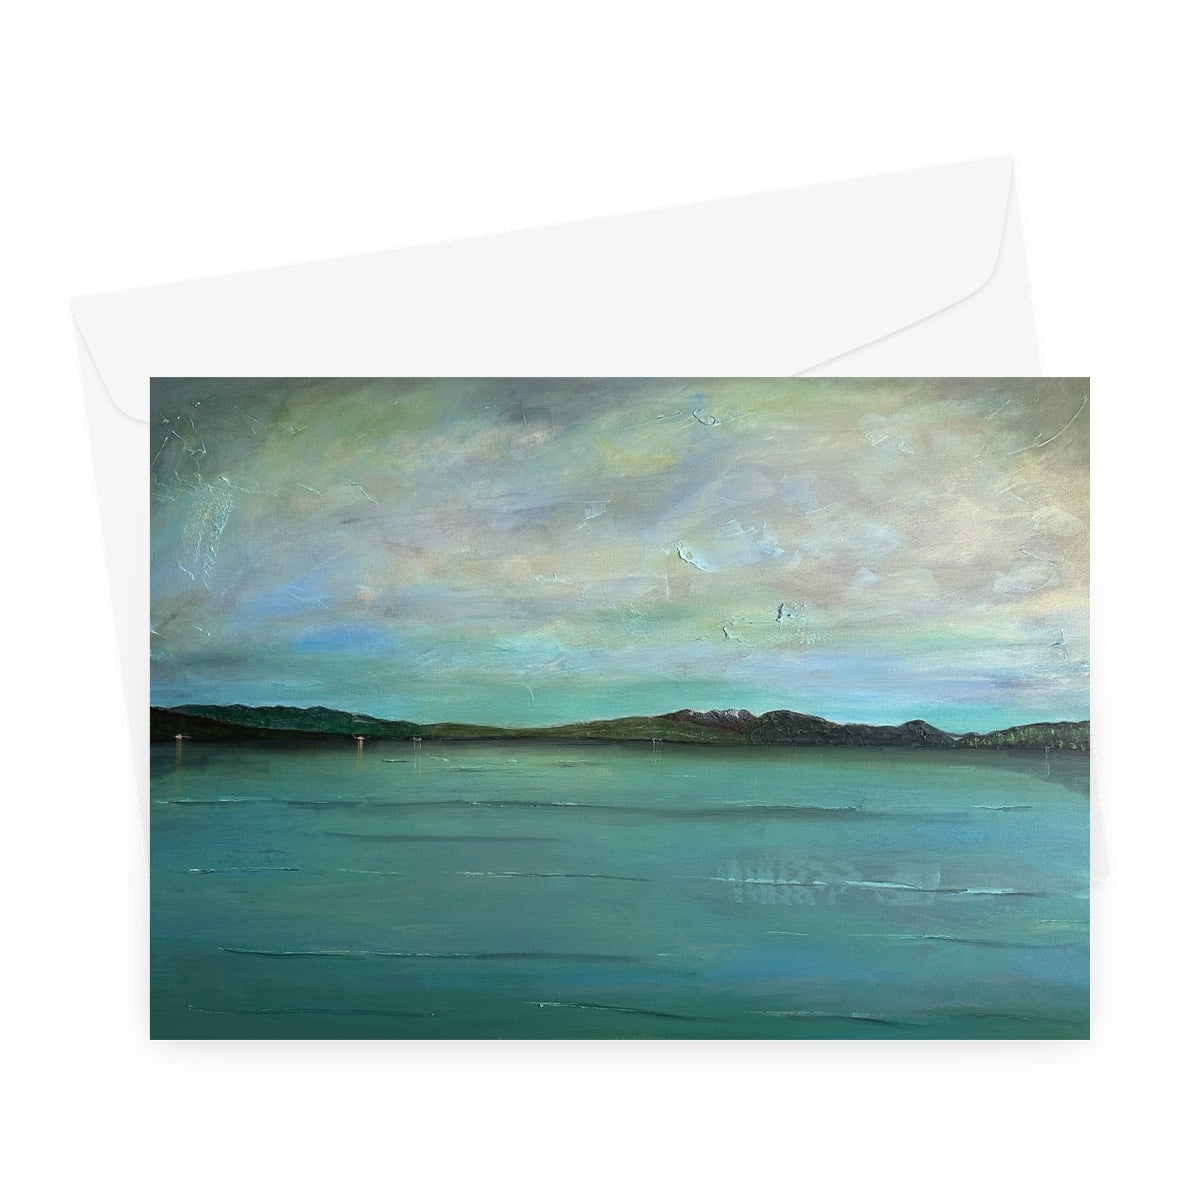 An Ethereal Loch Lomond Art Gifts Greeting Card-Stationery-Scottish Lochs & Mountains Art Gallery-A5 Landscape-1 Card-Paintings, Prints, Homeware, Art Gifts From Scotland By Scottish Artist Kevin Hunter